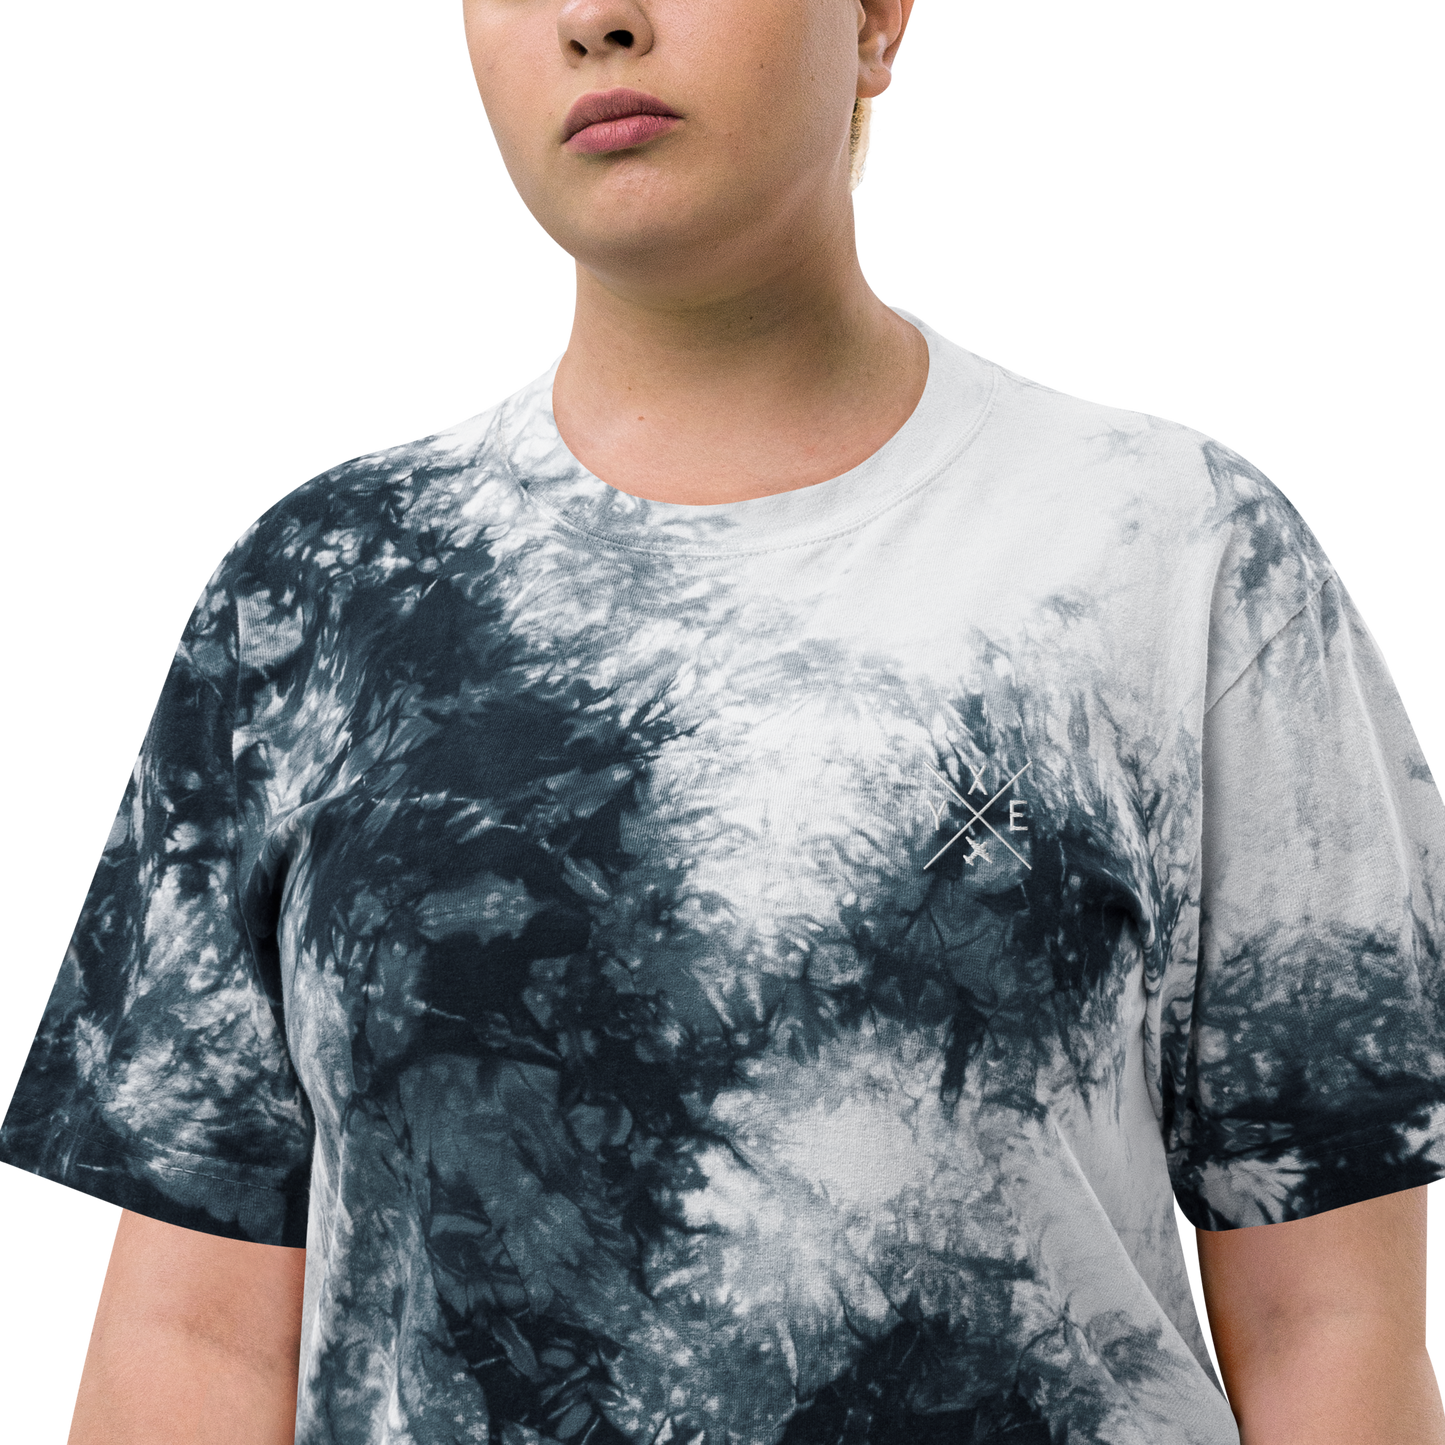 YHM Designs - YXE Saskatoon Oversized Tie-Dye T-Shirt - Crossed-X Design with Airport Code and Vintage Propliner - White Embroidery - Image 18